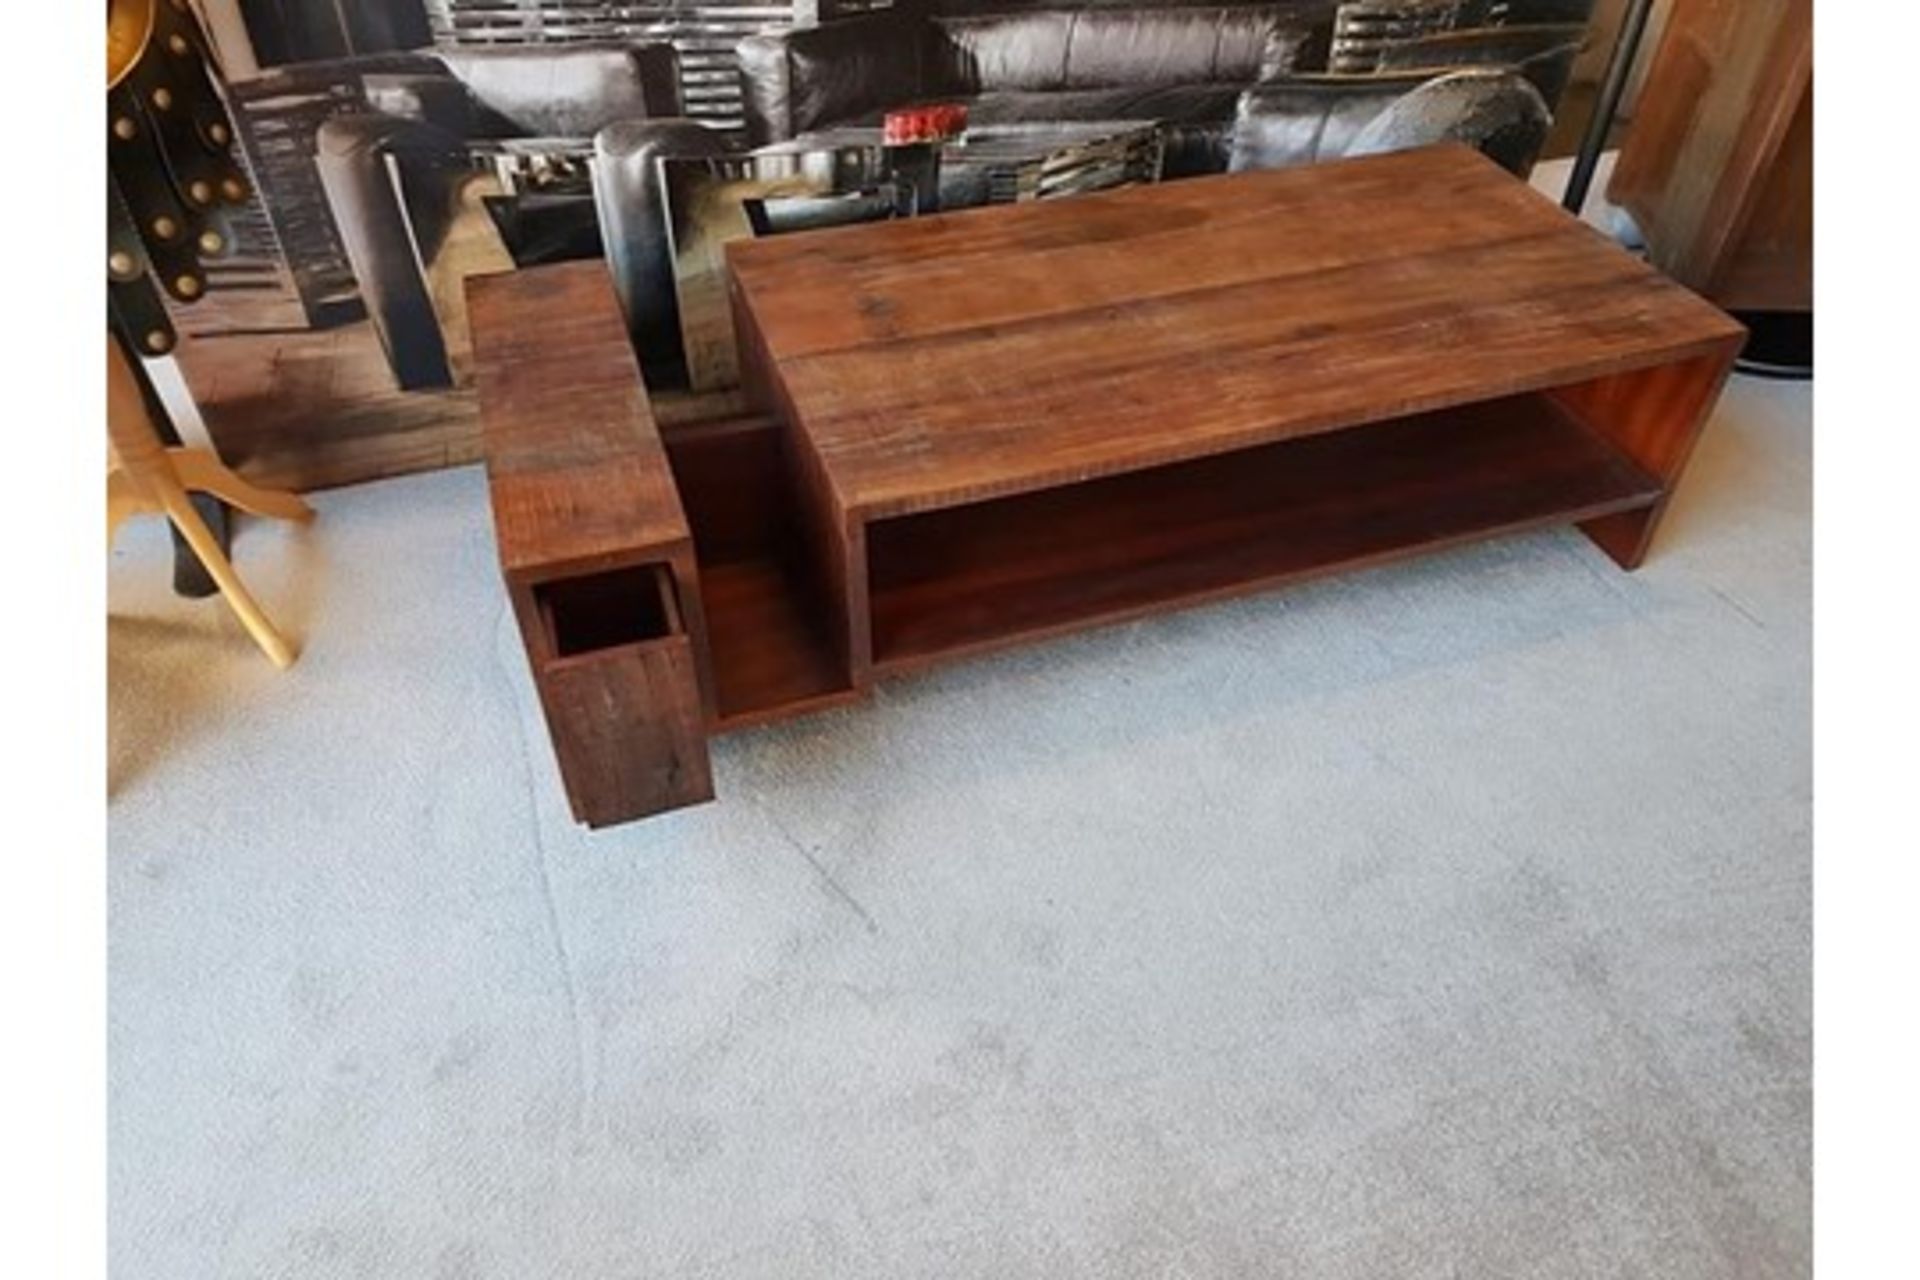 Avett CoffeeTable Hand-Crafted From Exotic Demolition Hardwoods,The Avett CoffeeTable Balances